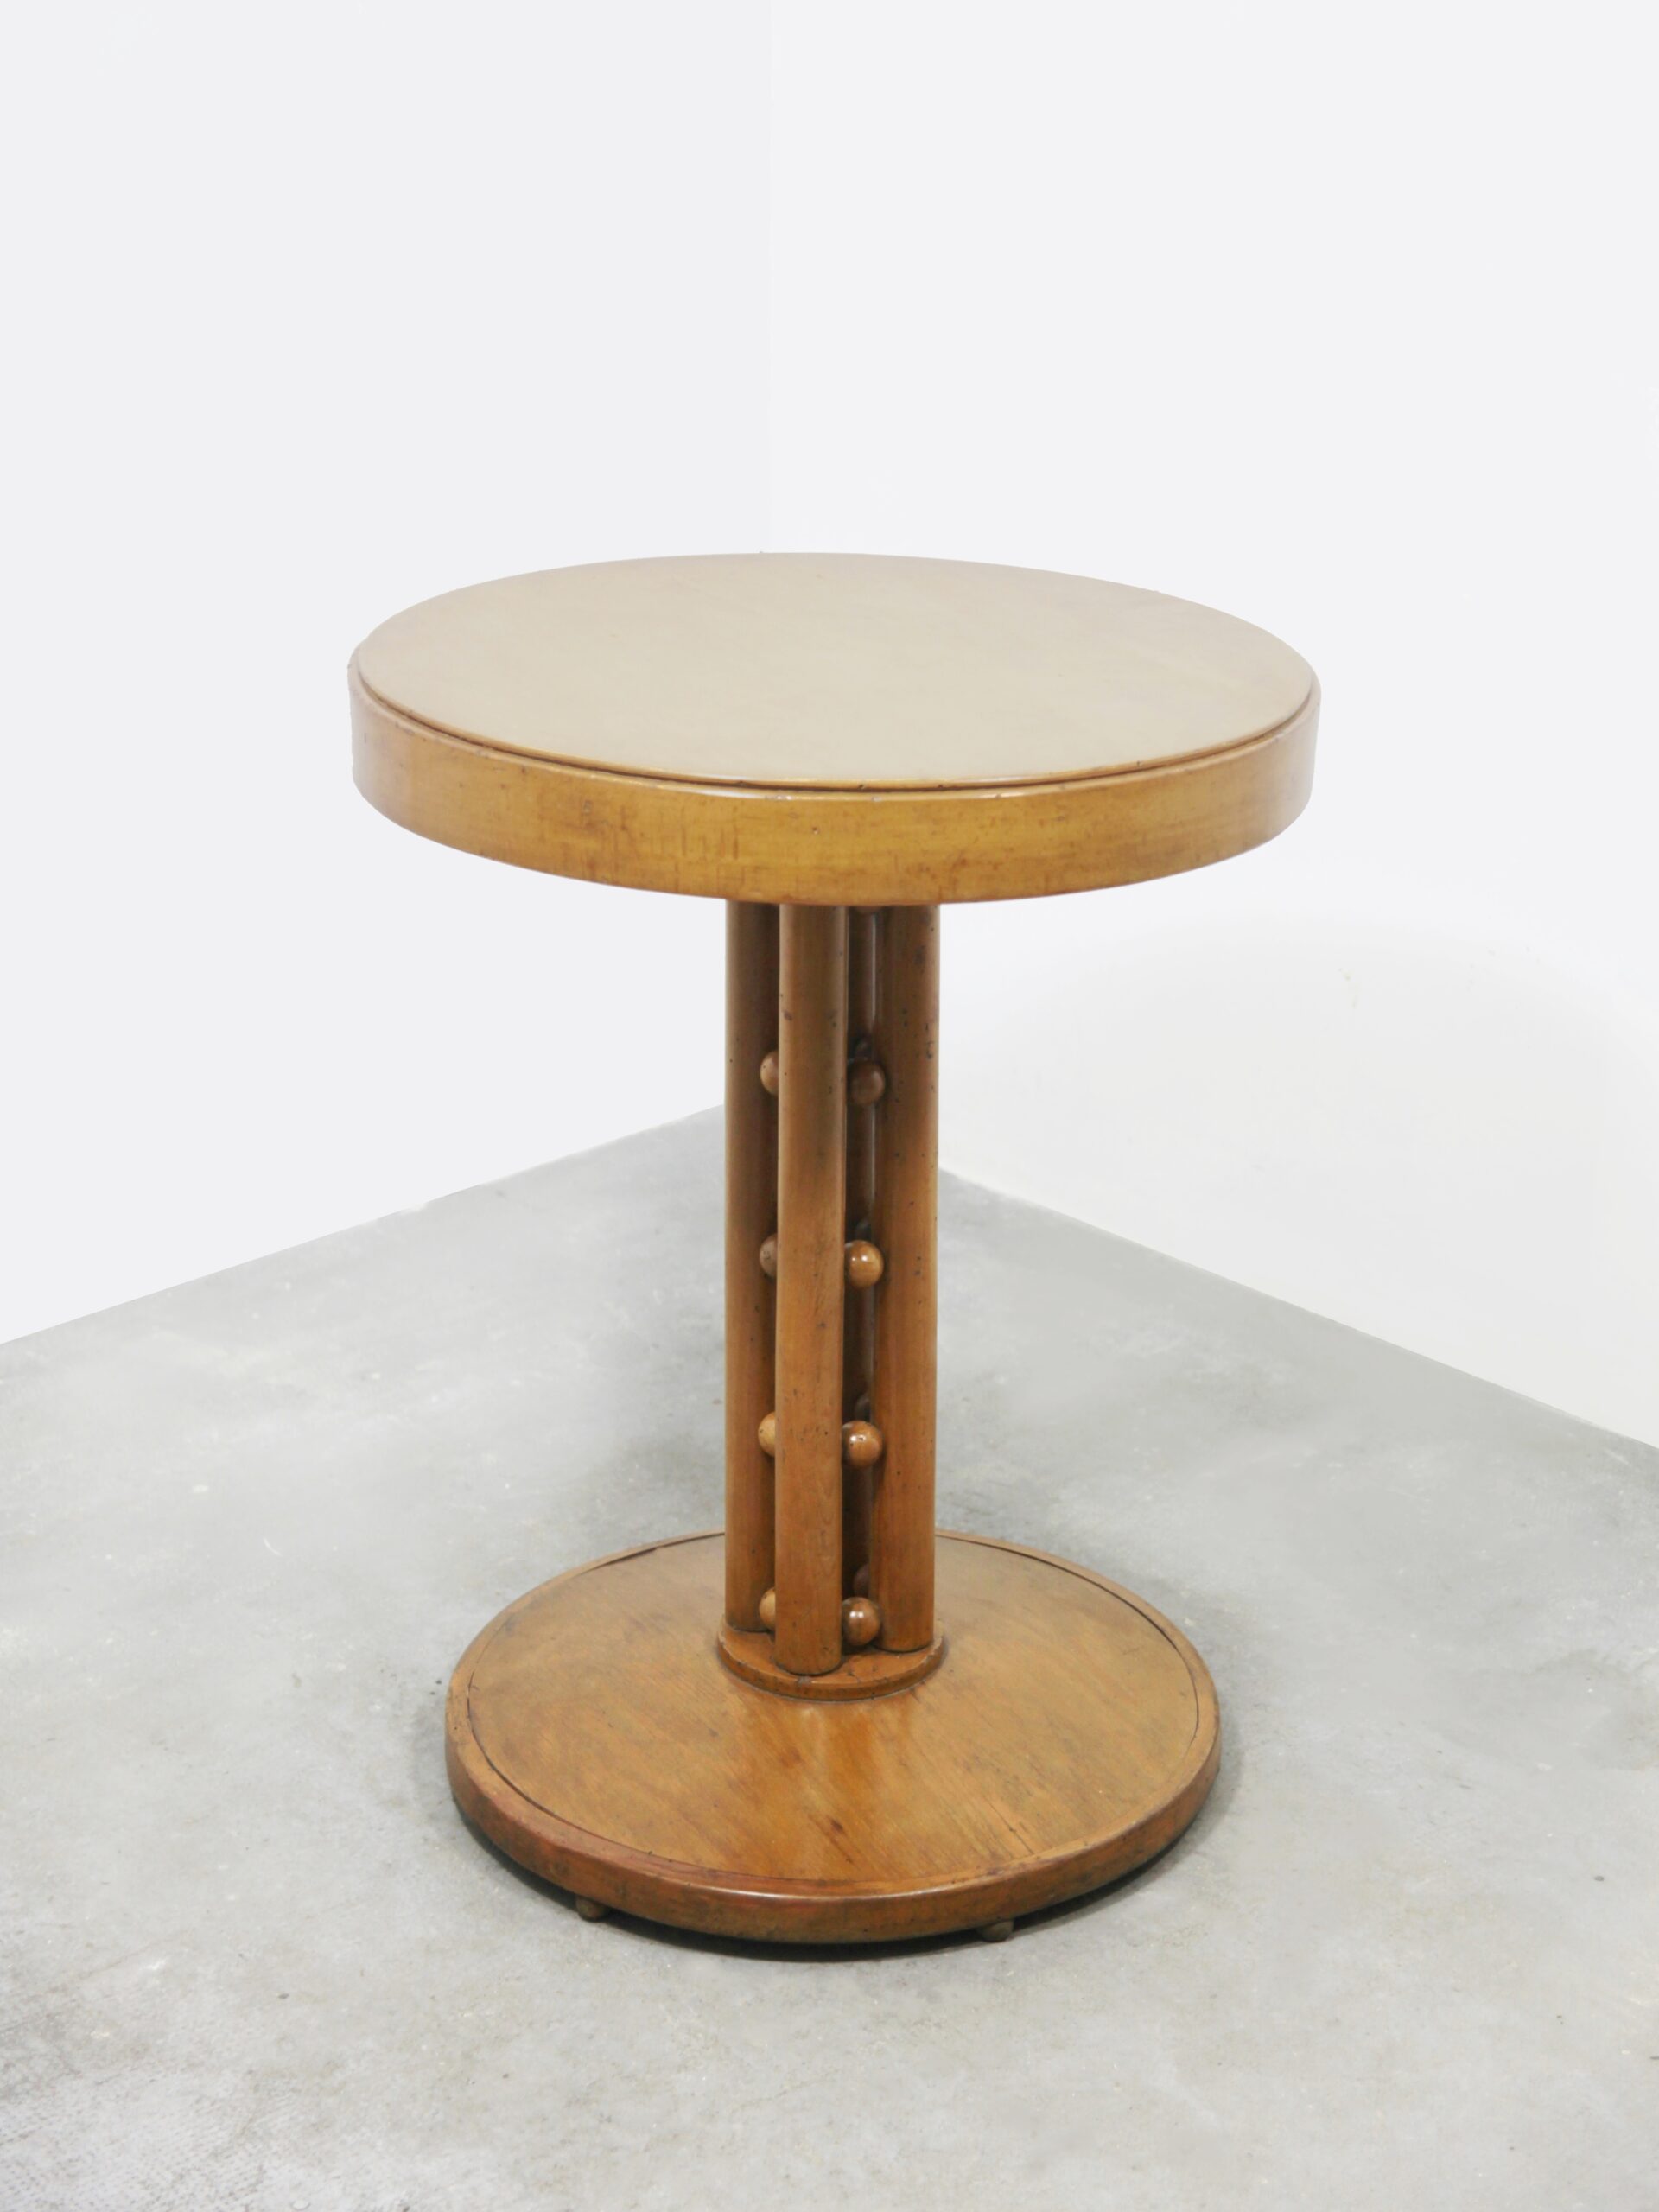 Occasional table mod. 1263, known as “5 balls” HOFFMANN Josef